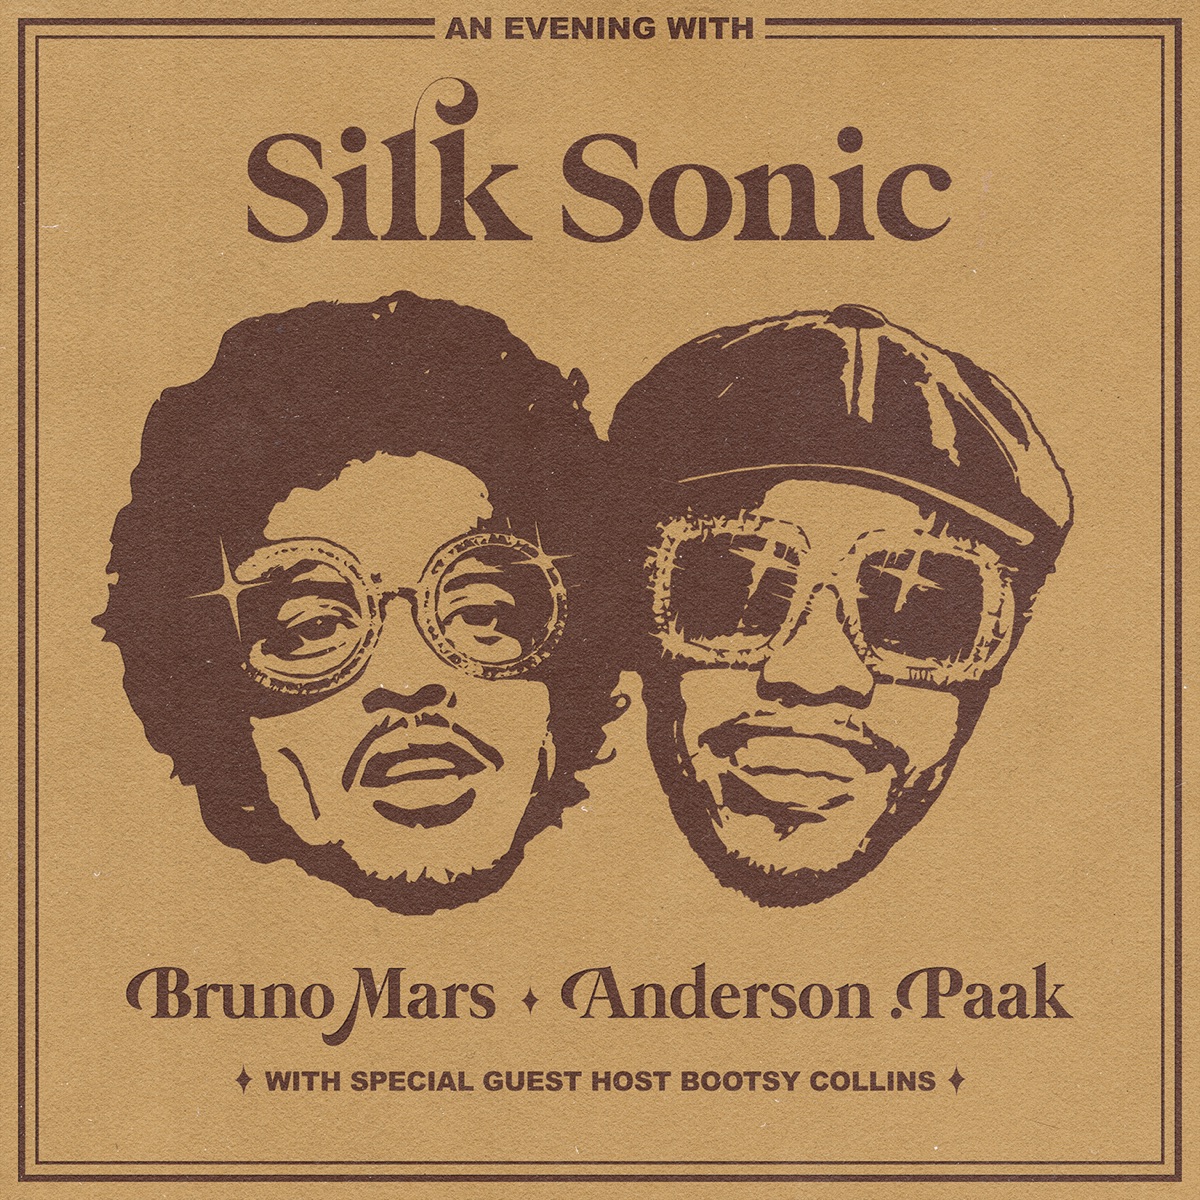 Cover for『Bruno Mars, Anderson .Paak, Silk Sonic - Smokin Out The Window』from the release『An Evening With Silk Sonic 』